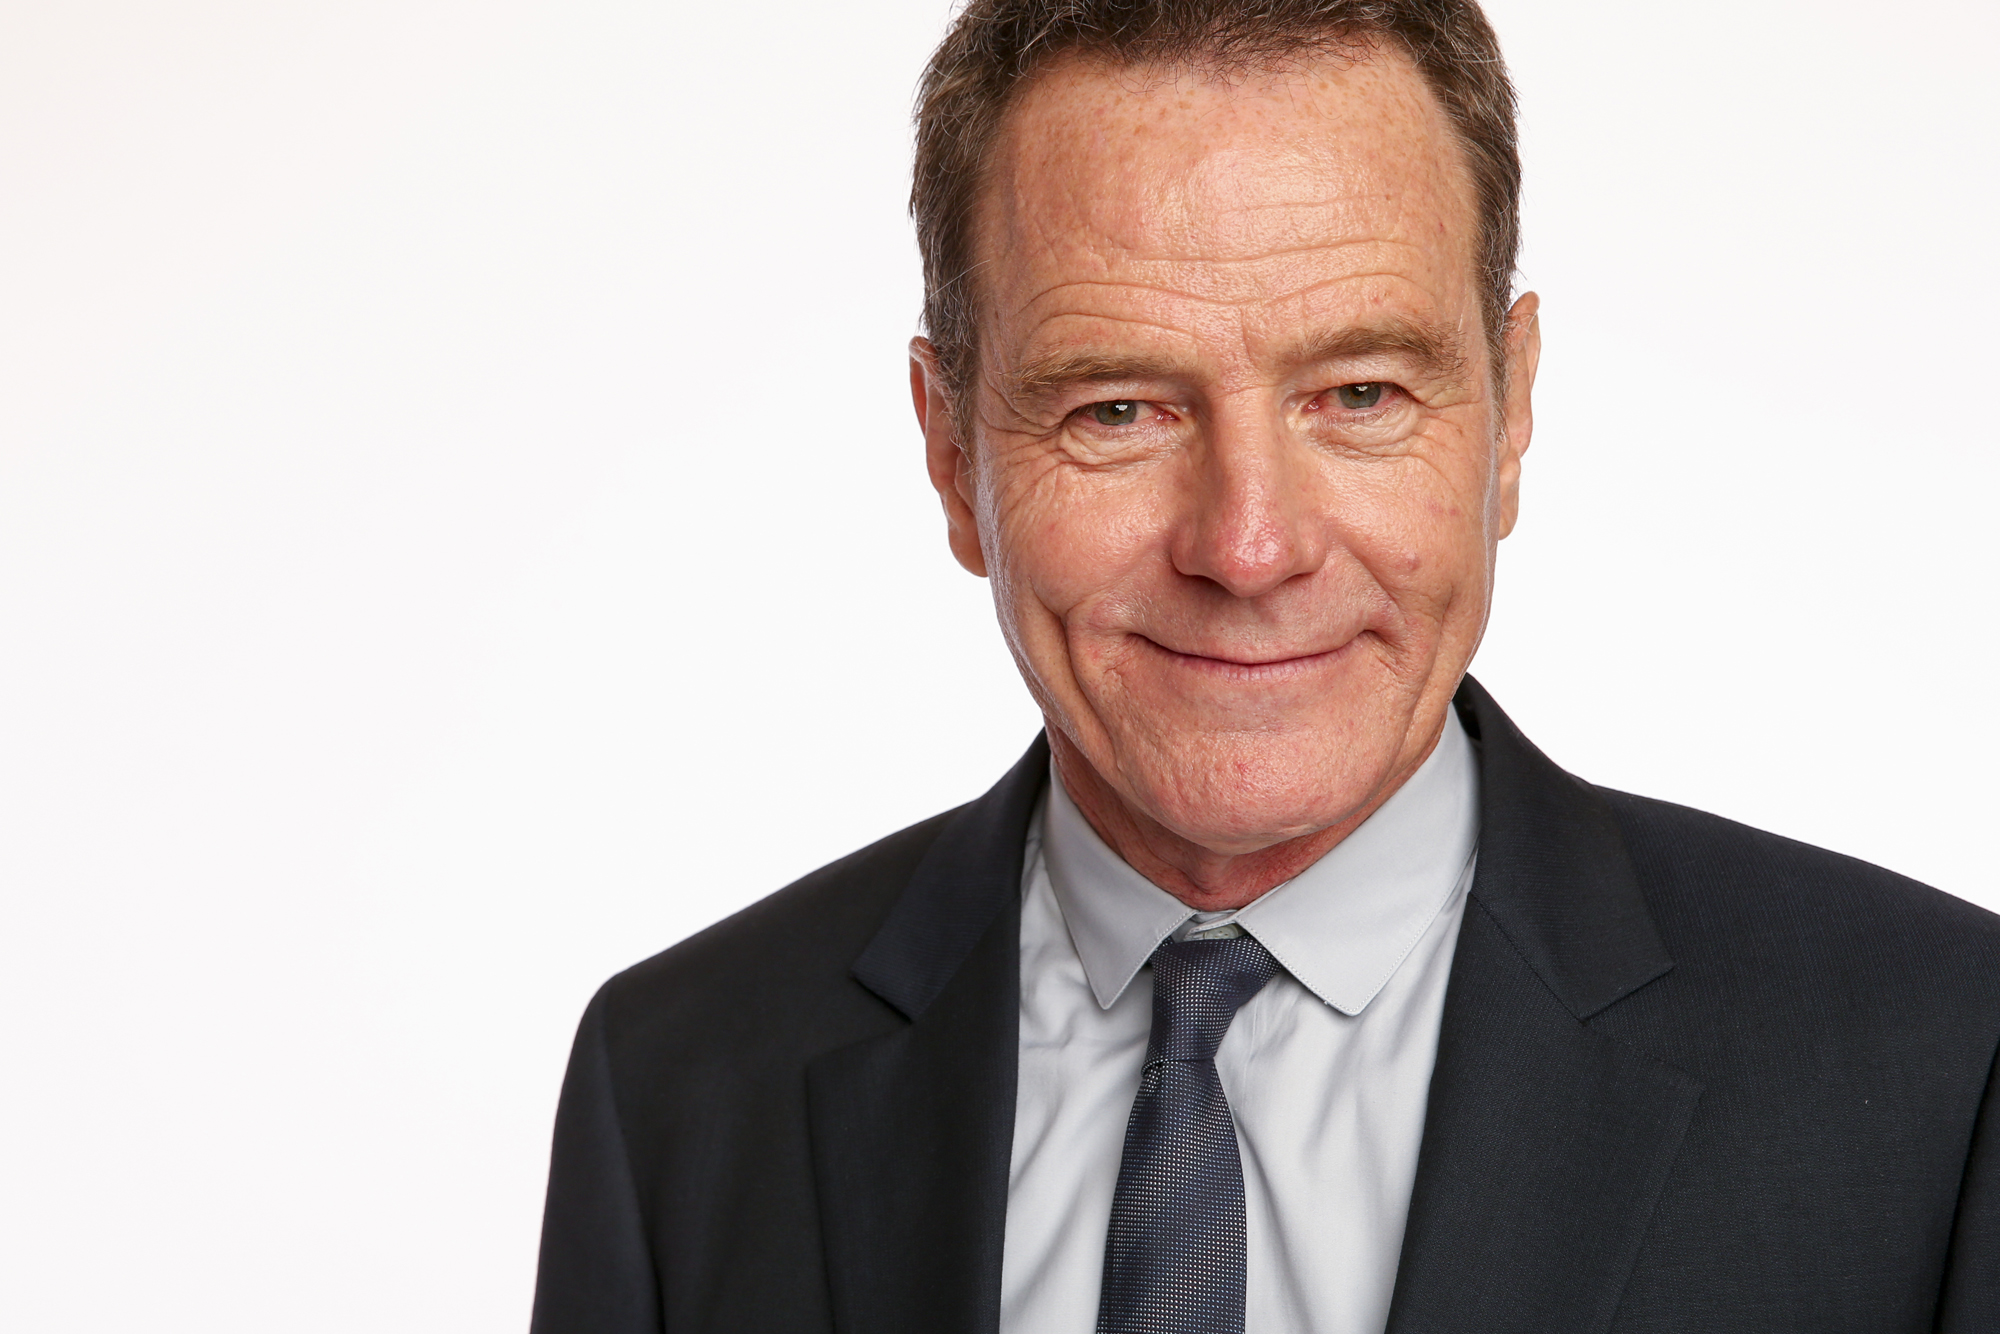 LOS ANGELES, CA - JUNE 10:  Actor  Bryan Cranston poses for a portrait at the Broadcast Television Journalists Association's Third Annual Critics' Choice Television Awards on June 10, 2013 in Los Angeles, California.  (Photo by Christopher Polk/Getty Images for CCTA)